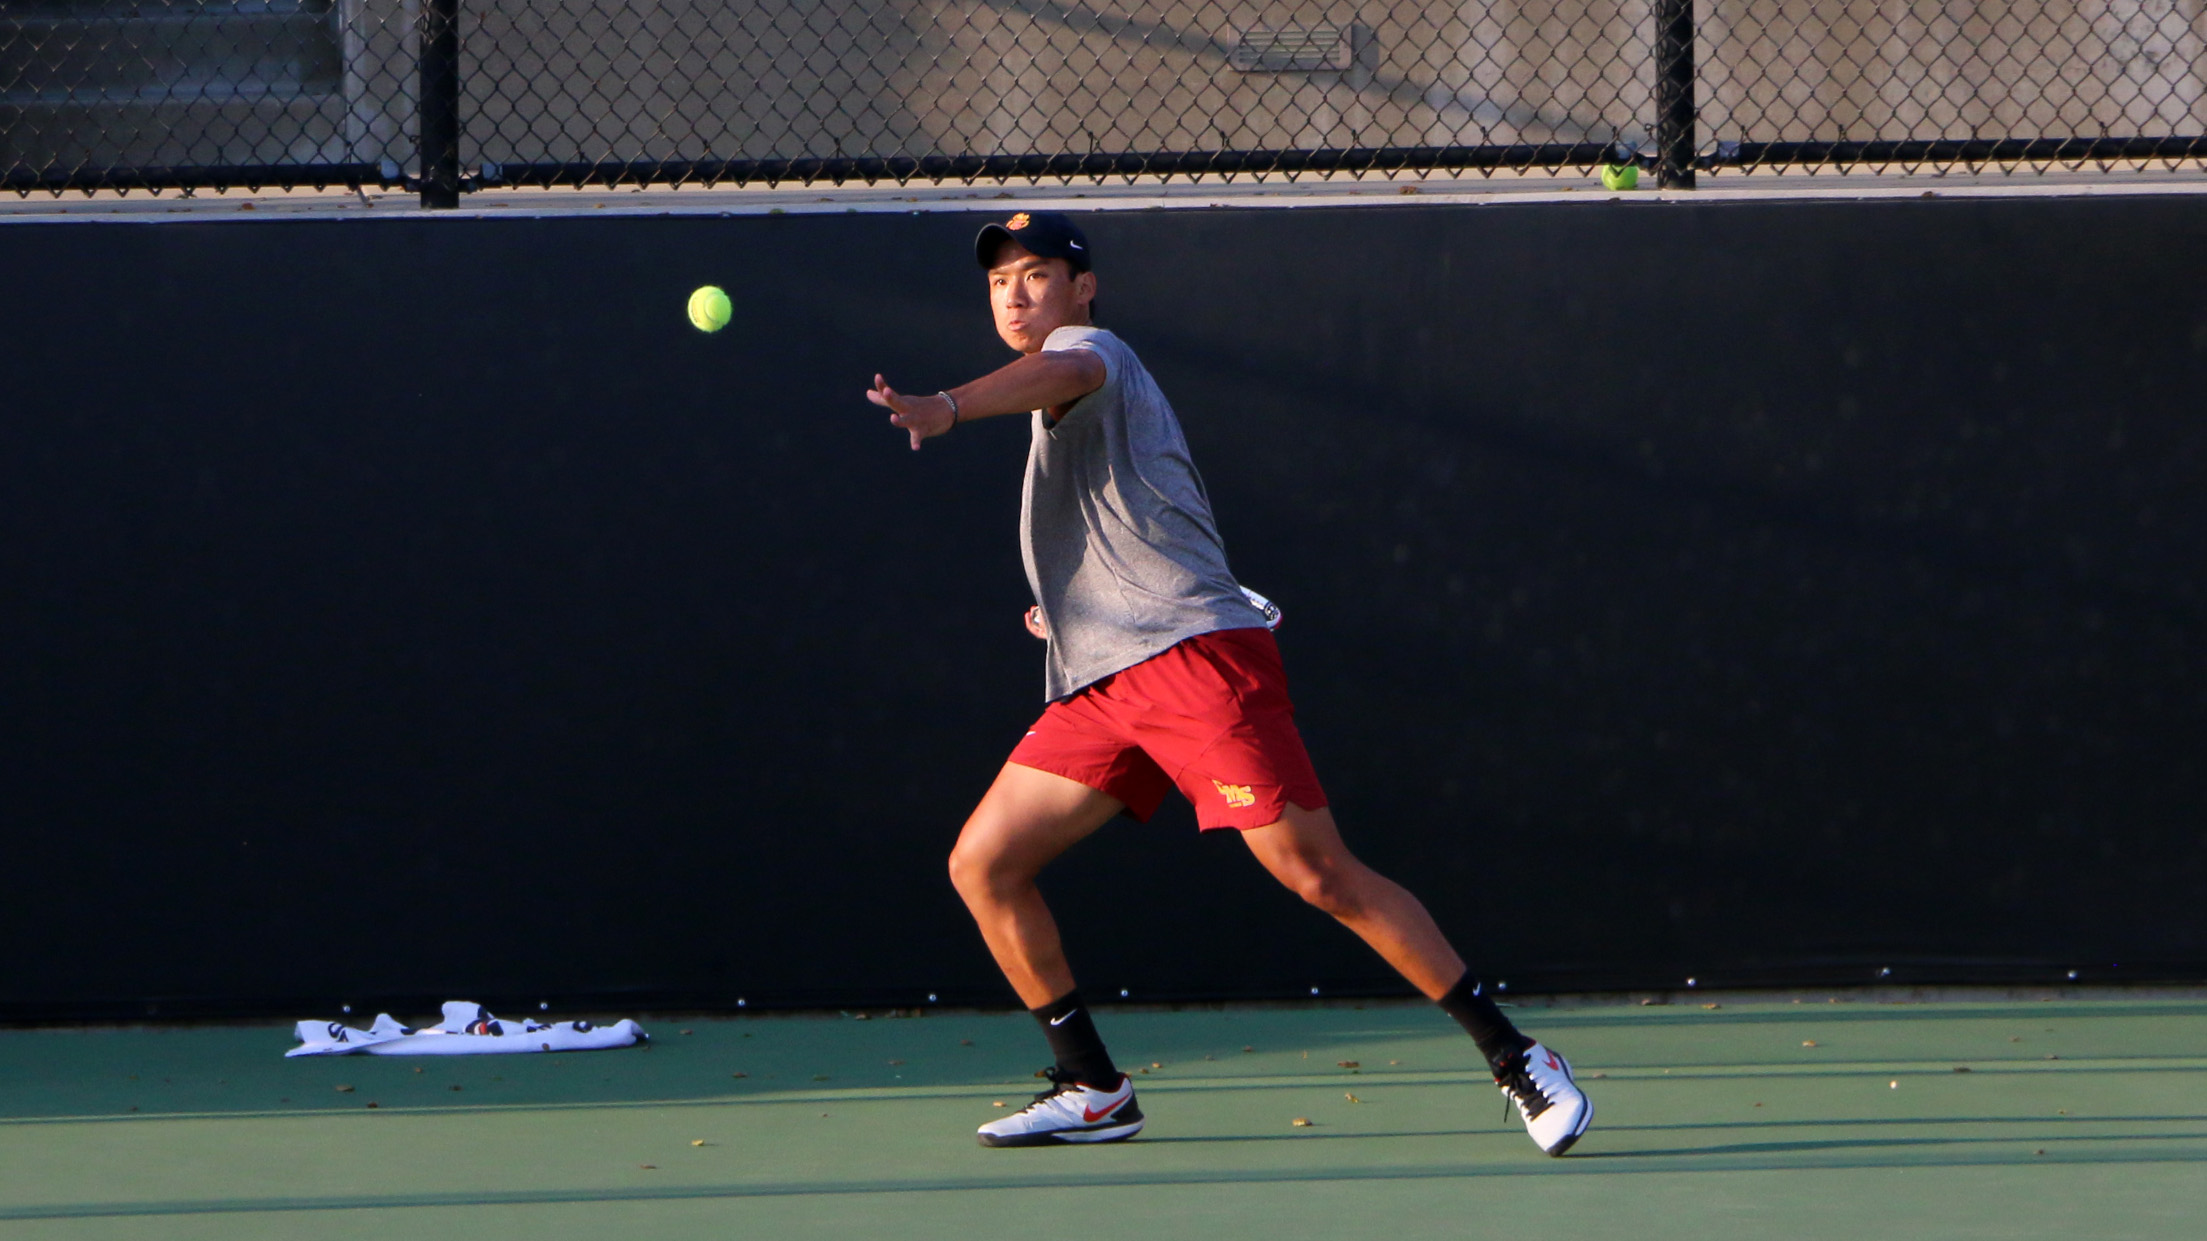 Warren Pham provided the clincher for CMS at No. 6 singles